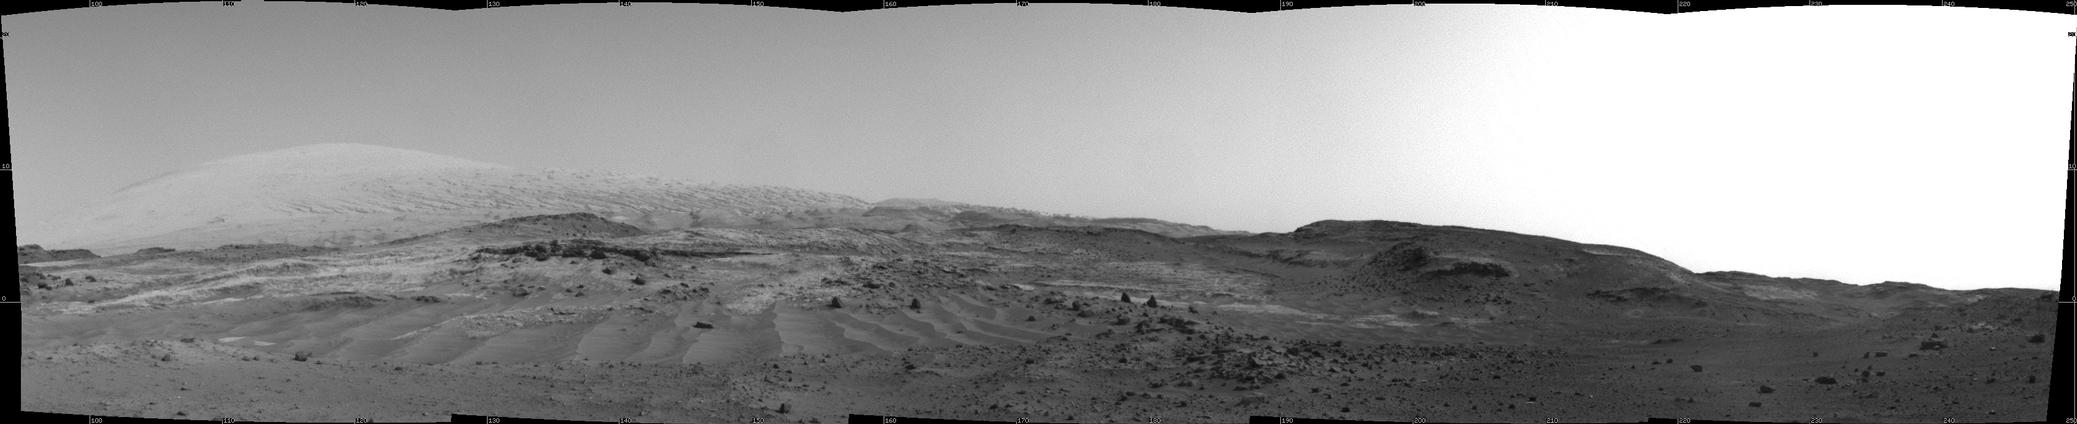 NASA's Curiosity Mars rover used its Navigation Camera to capture this view on April 11, 2015, during passage through a valley called "Artist's Drive" on the route up Mount Sharp.